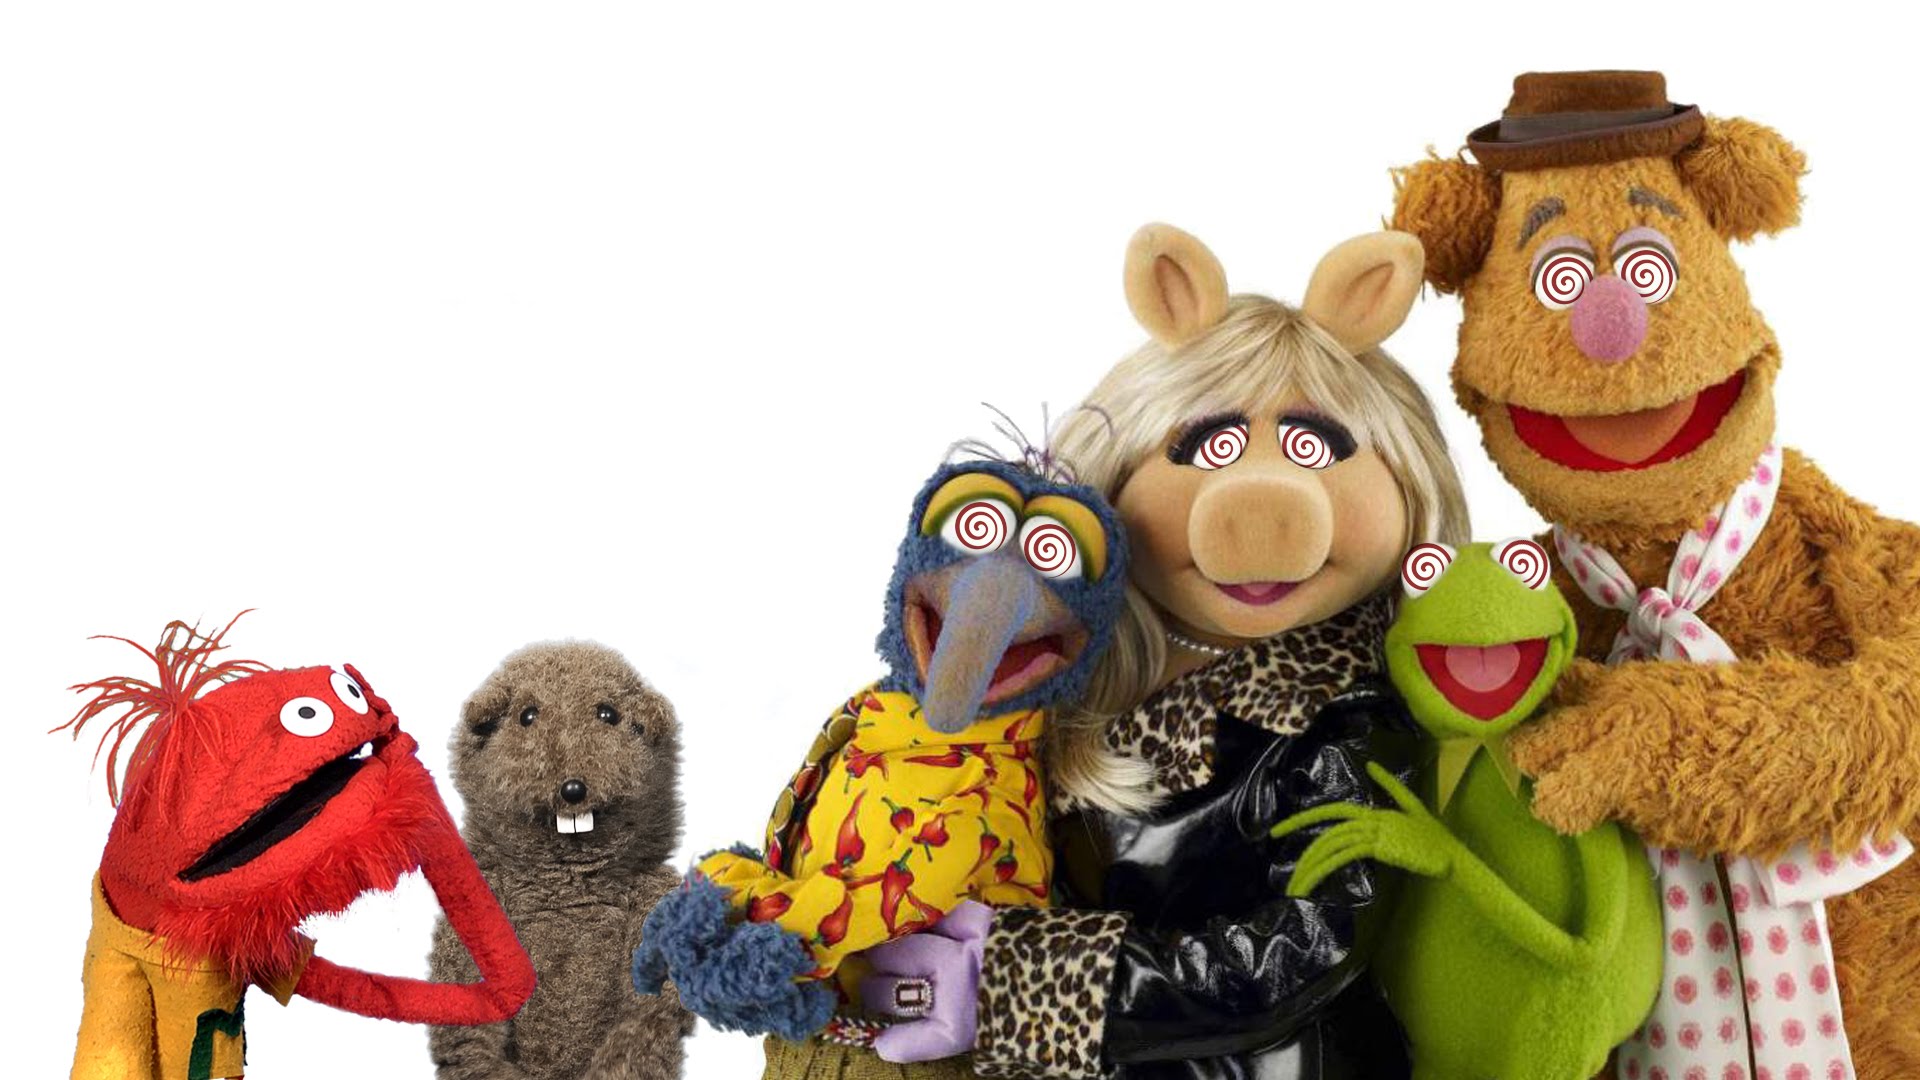 Nice Images Collection: The Muppets Desktop Wallpapers